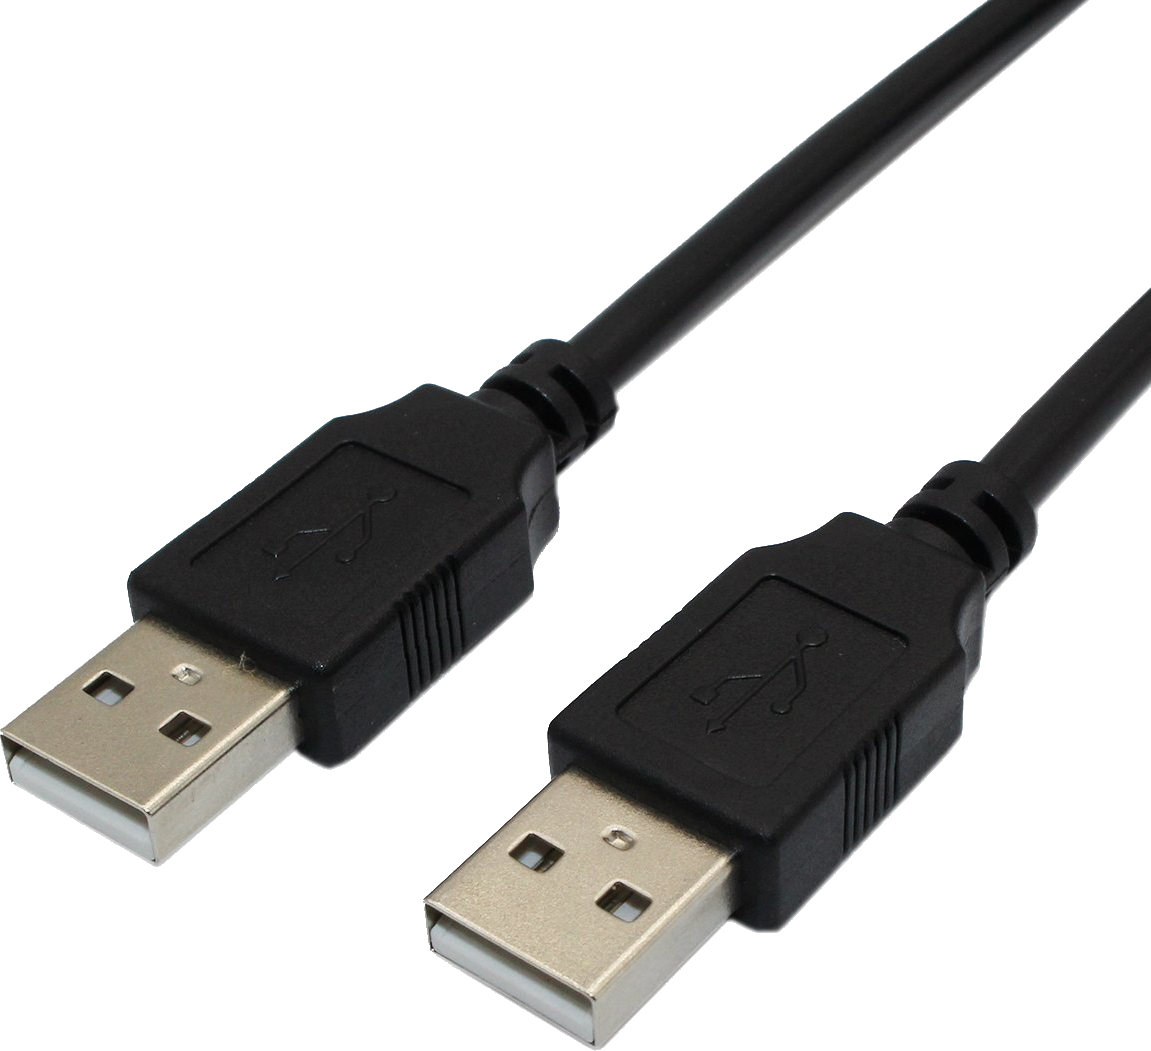 16-6504 USB 2.0 A Male to USB A Male Cable